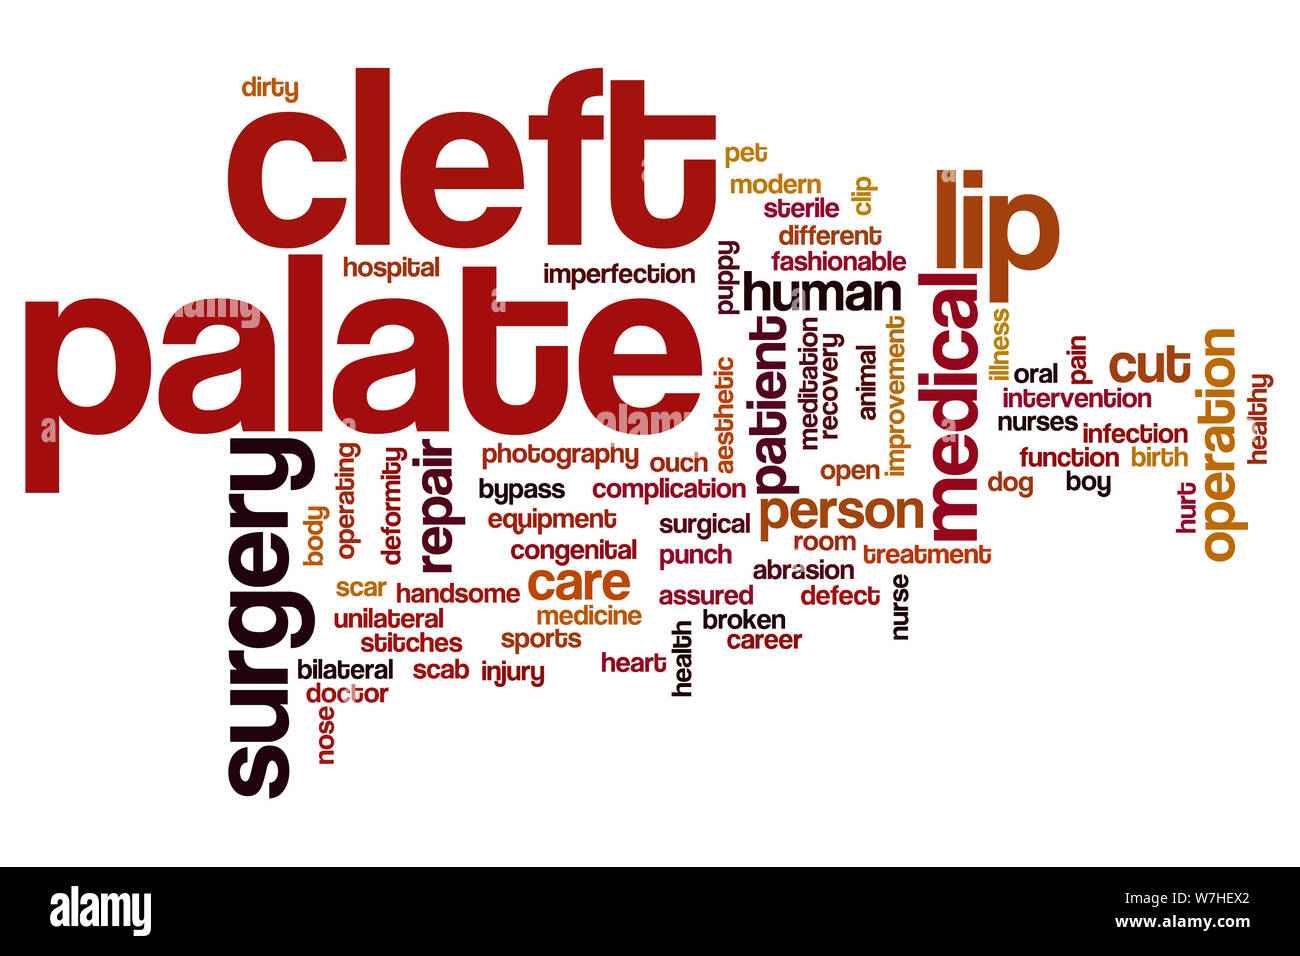 Cleft palate word cloud concept Stock Photo